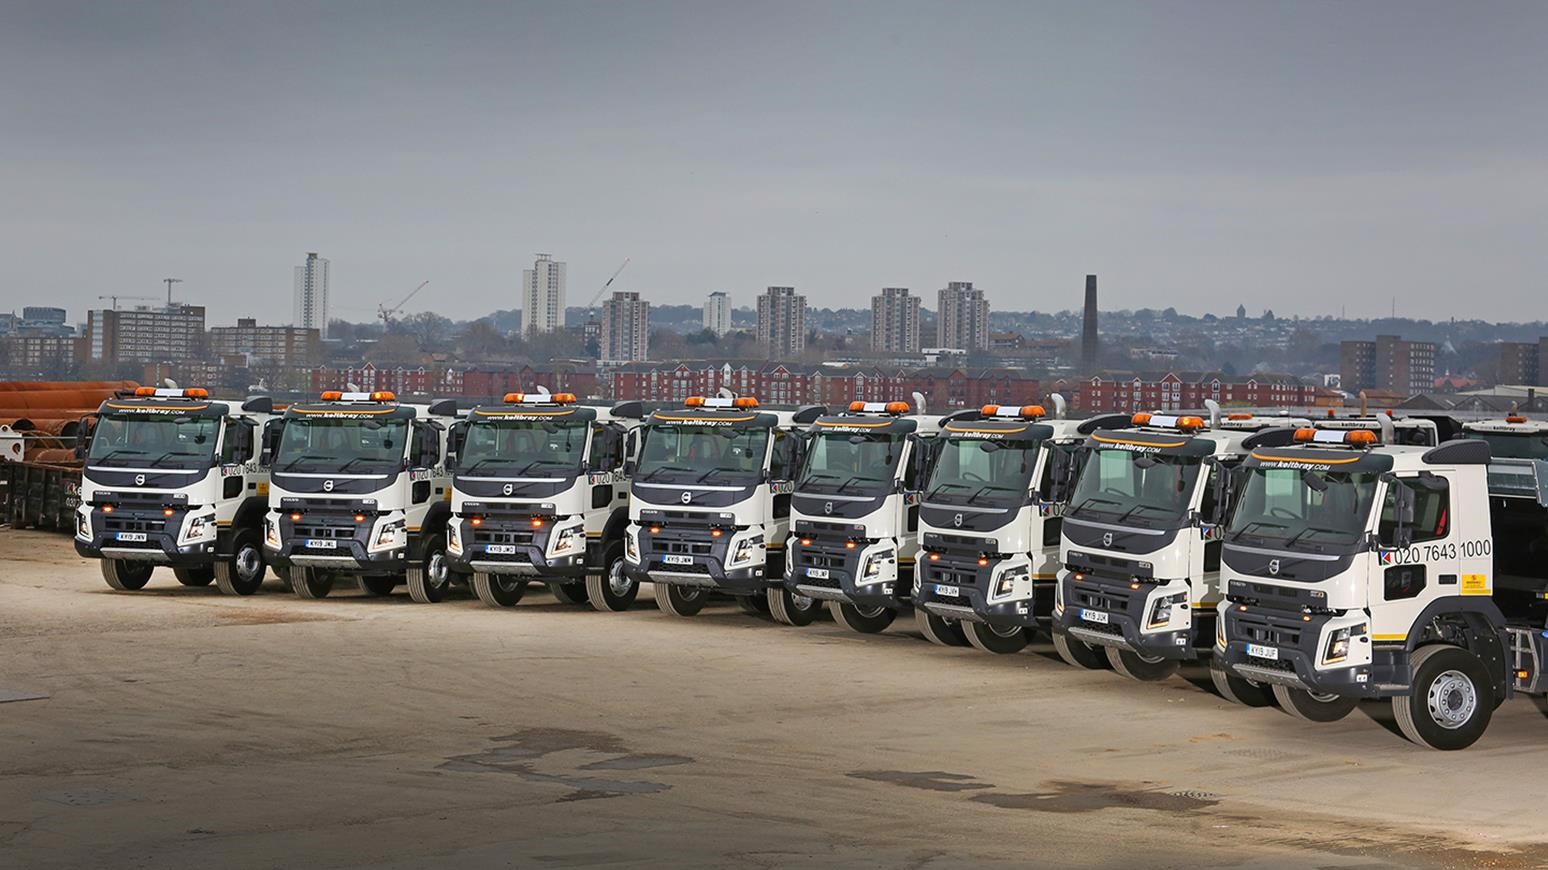 Surrey-Based Construction Engineering Company Adds 14 Volvo FMX Trucks To Its Fleet & Has More Volvos On The Way